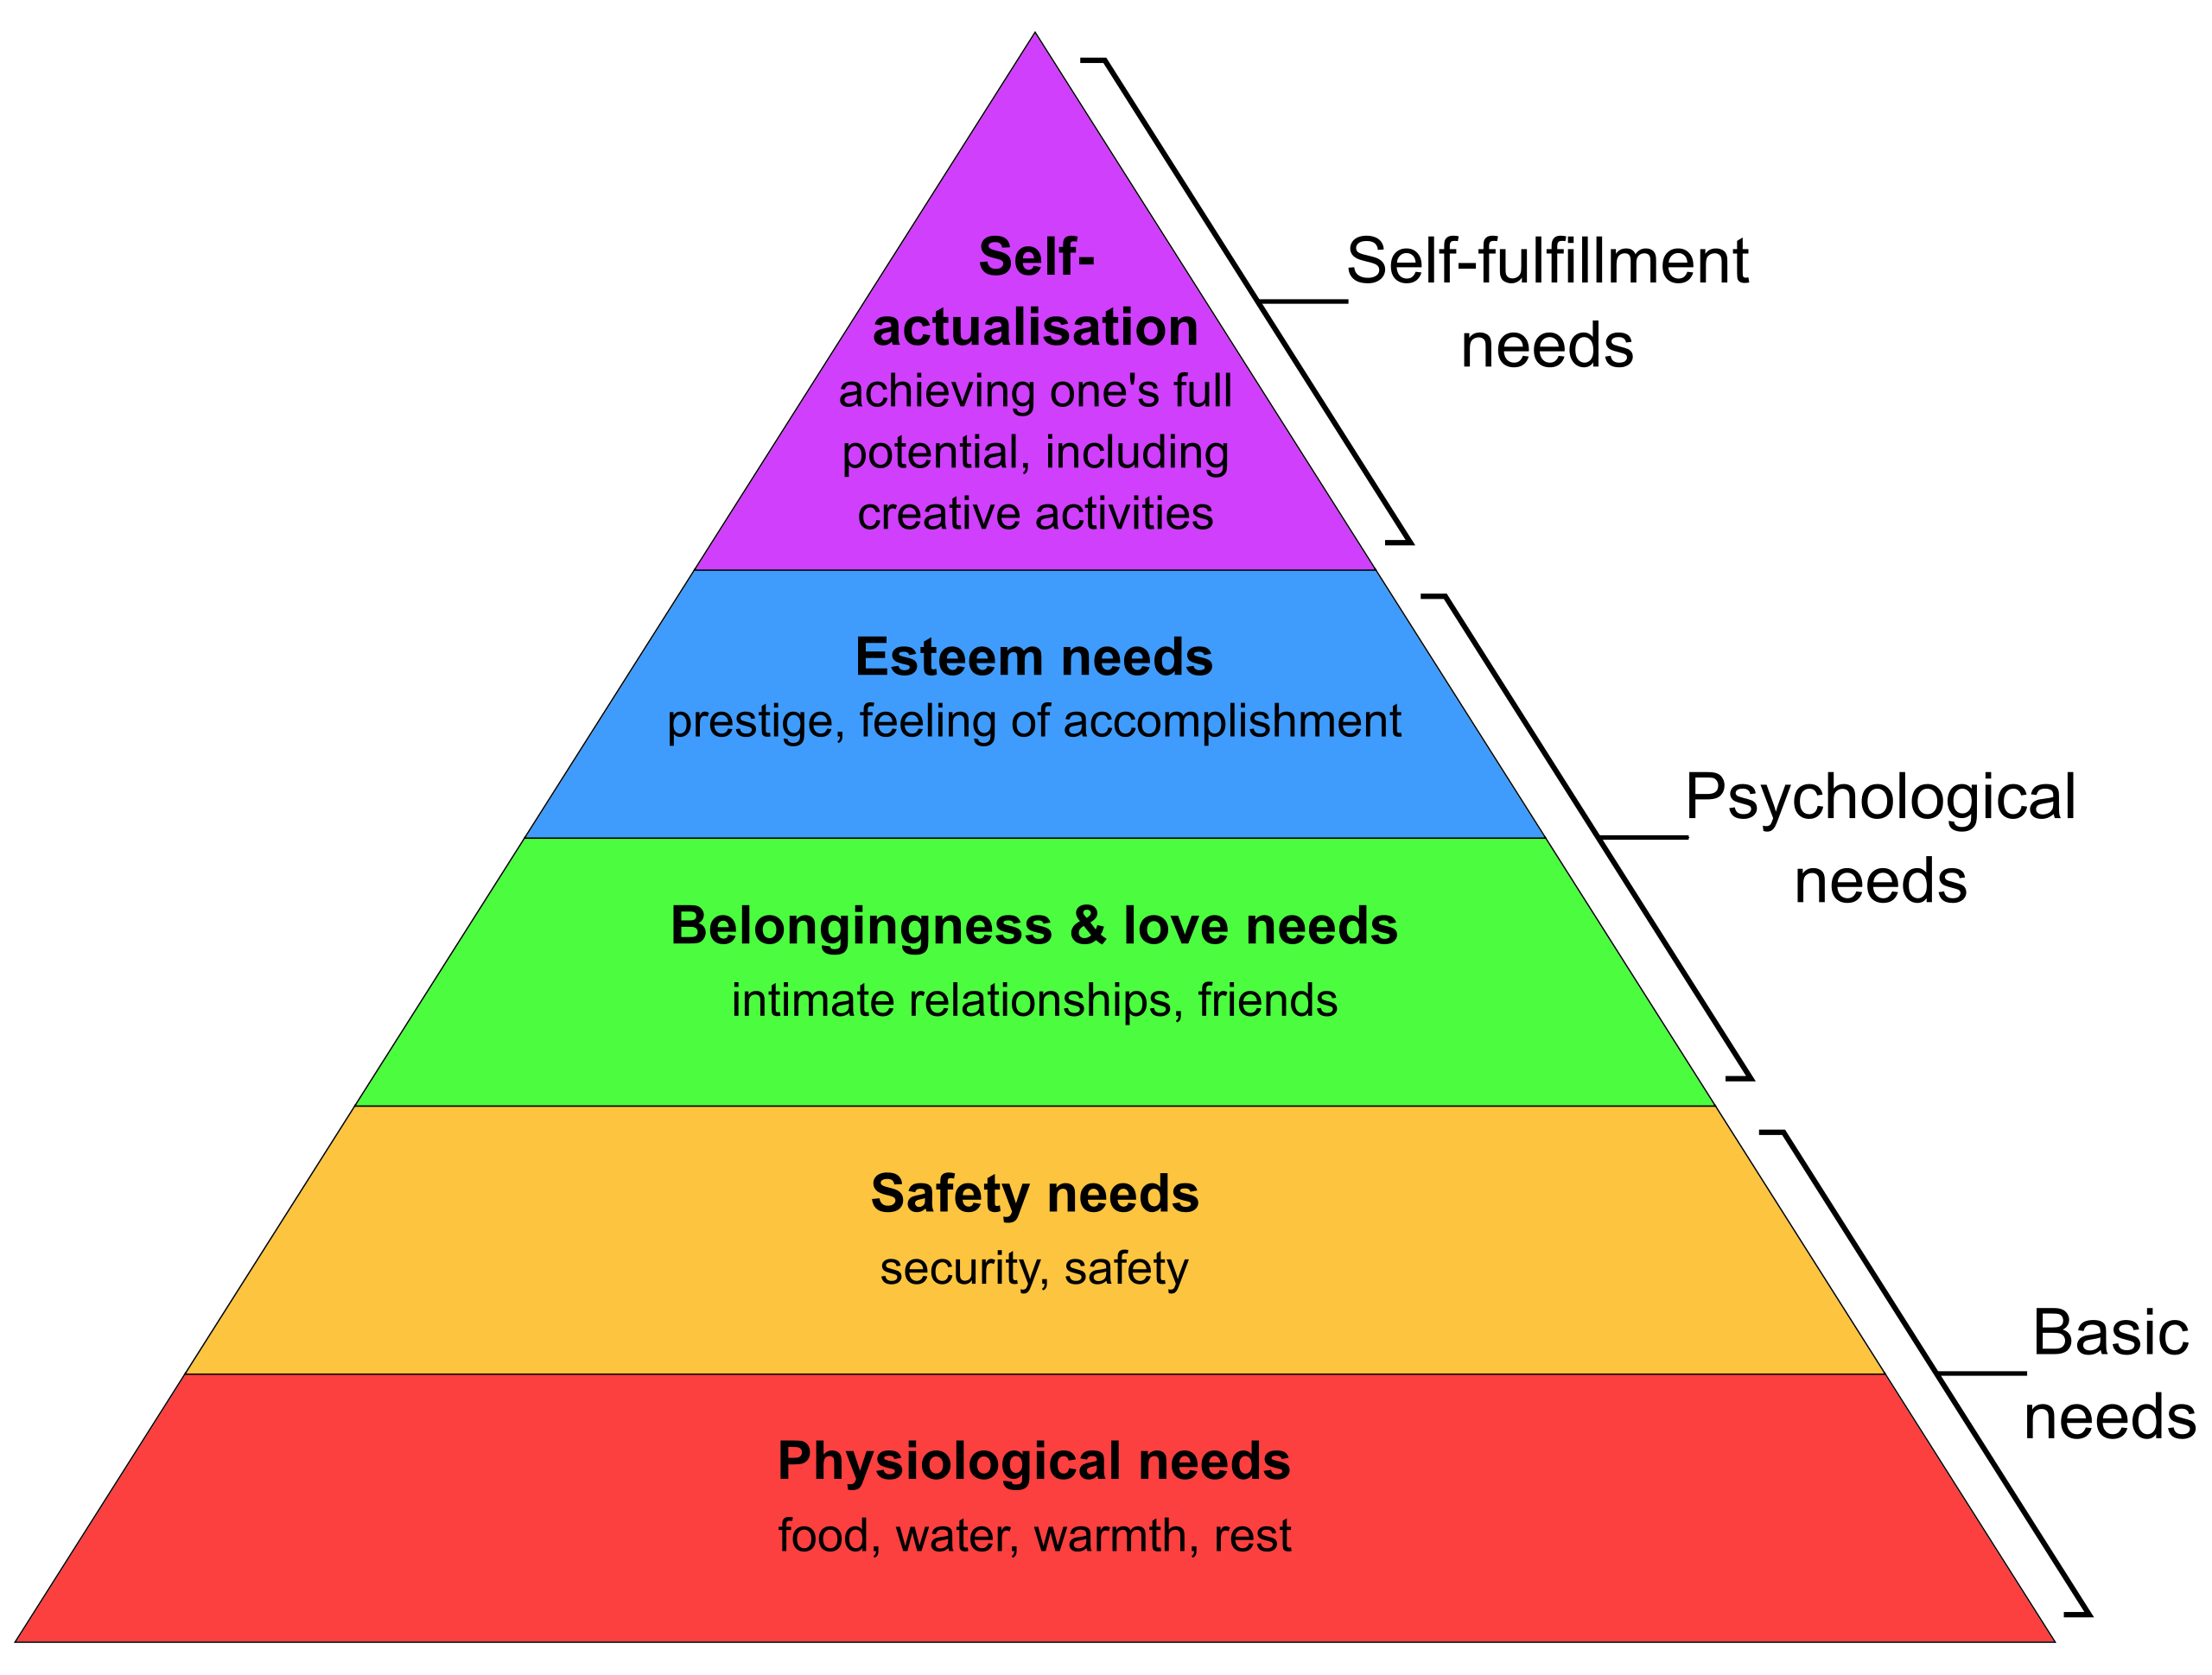 Maslow's five-tier model taken from Wikipedia at https://en.wikipedia.org/wiki/Maslow's_hierarchy_of_need